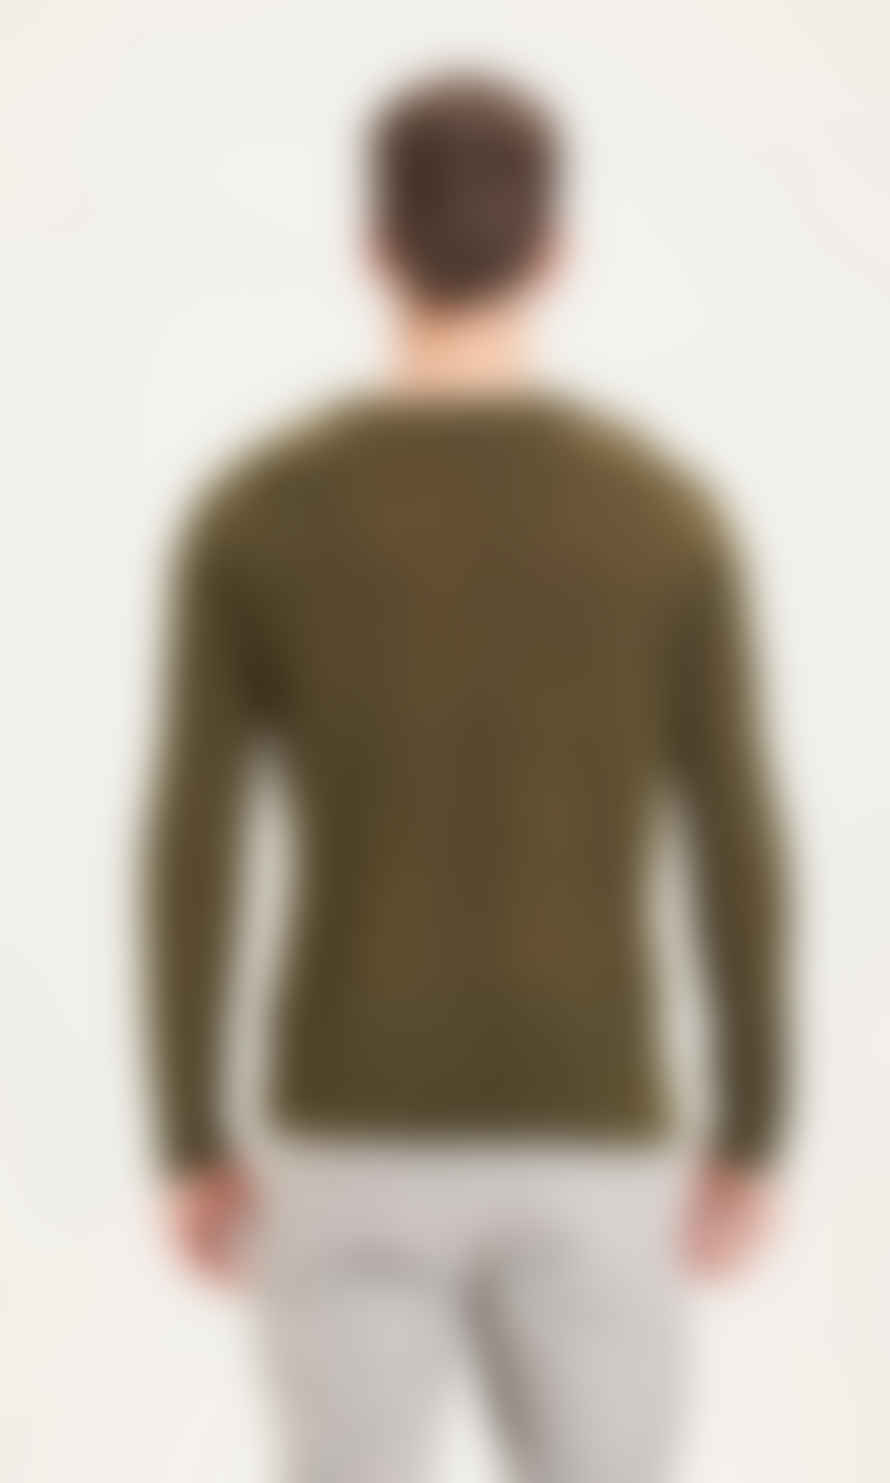 Knowledge Cotton Apparel  Forrest Night 80619 Forrest O-Neck Basic Tencel Knit Sweater